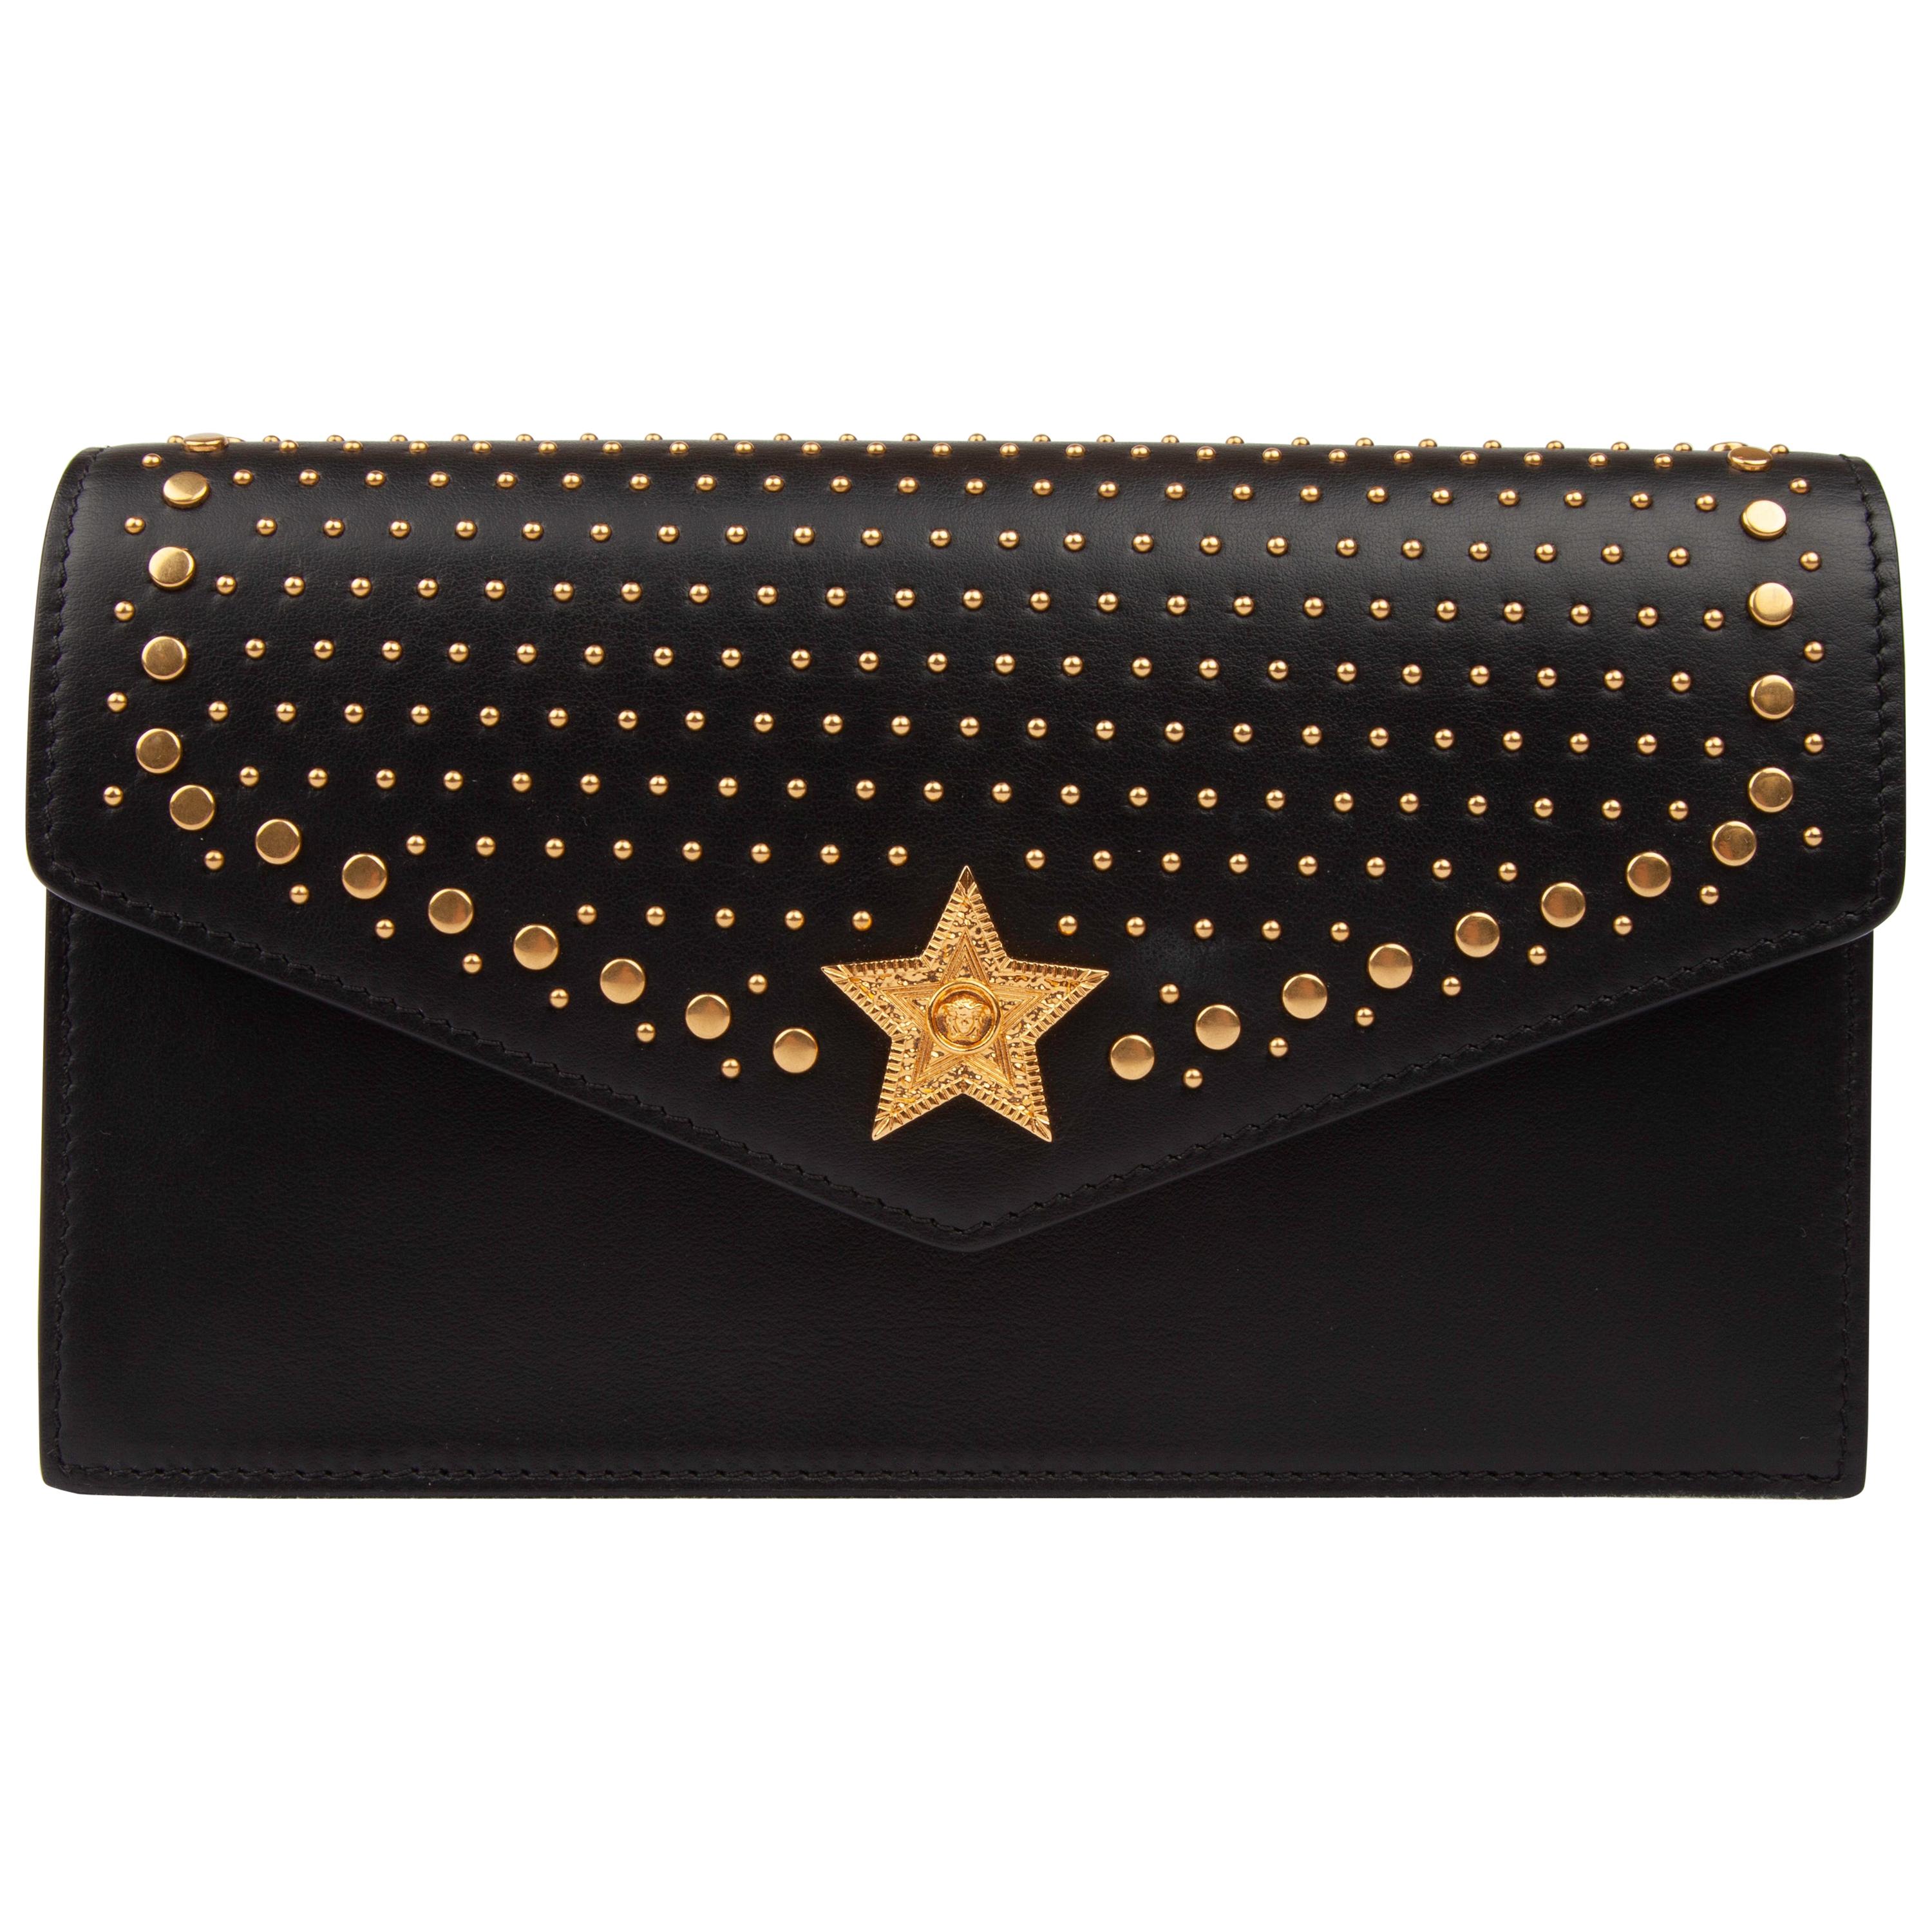 Versace Western Studded Black Leather Clutch Evening Bag with Gold Tone Chain